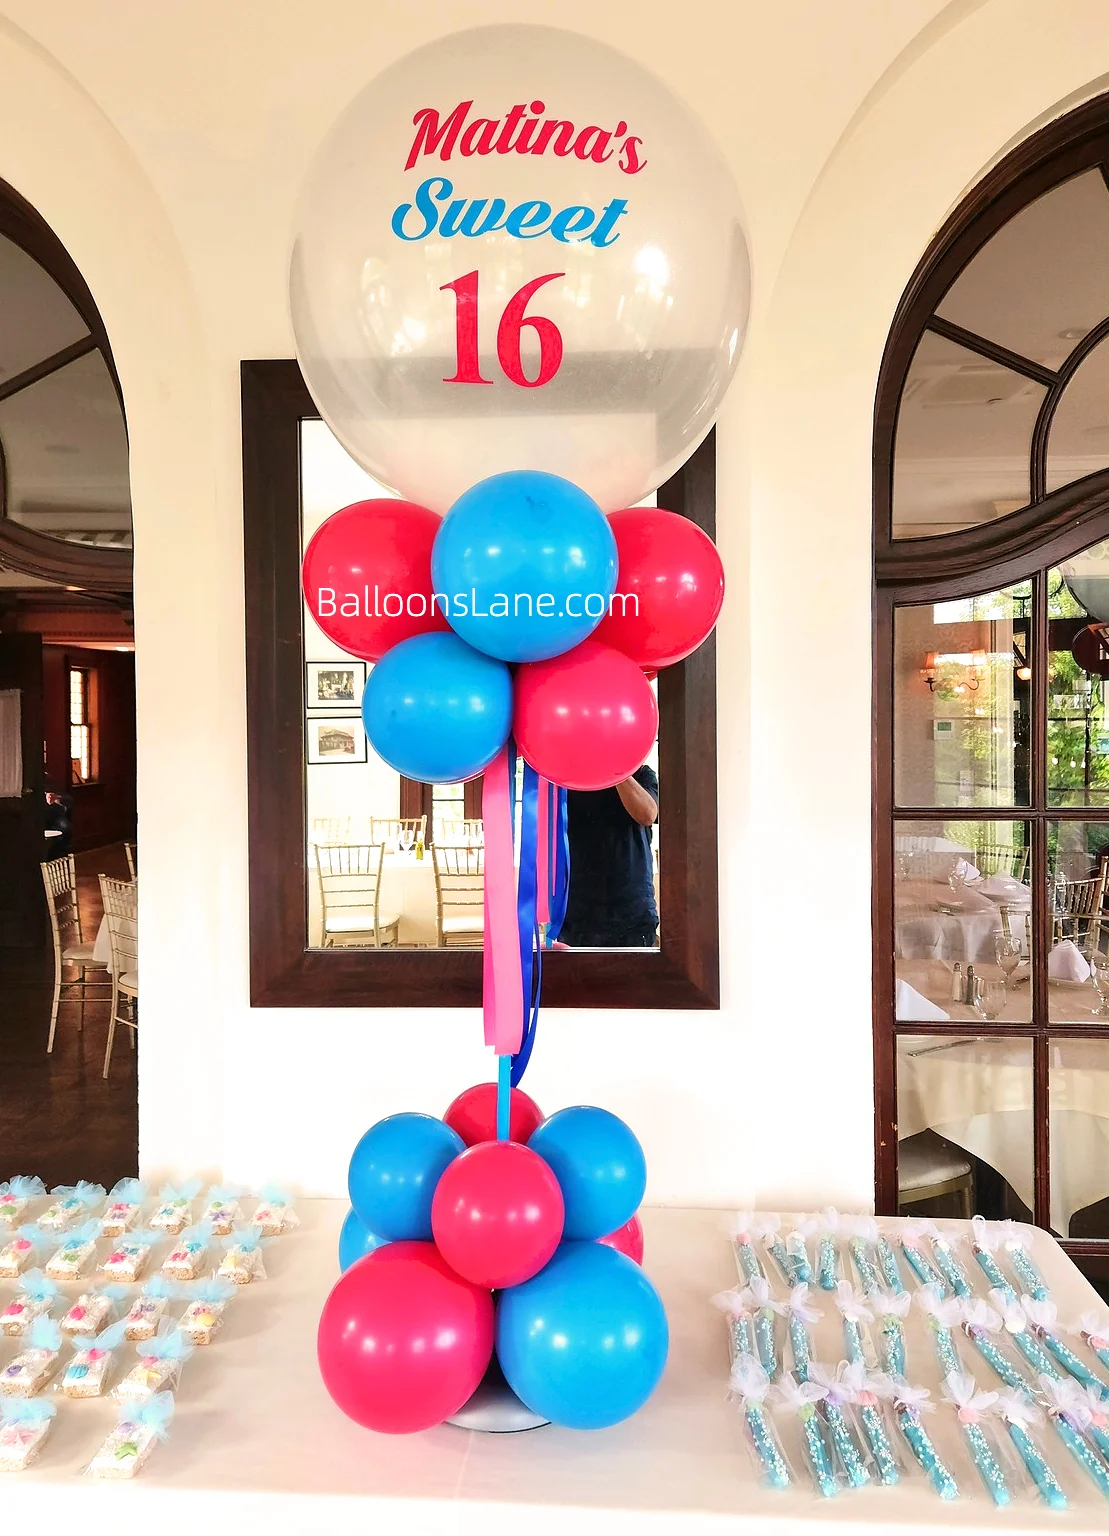 A bouquet arrangement featuring ash pink and blue balloons with a customized clear balloon on top, perfect for a 16th birthday celebration in Staten Island.